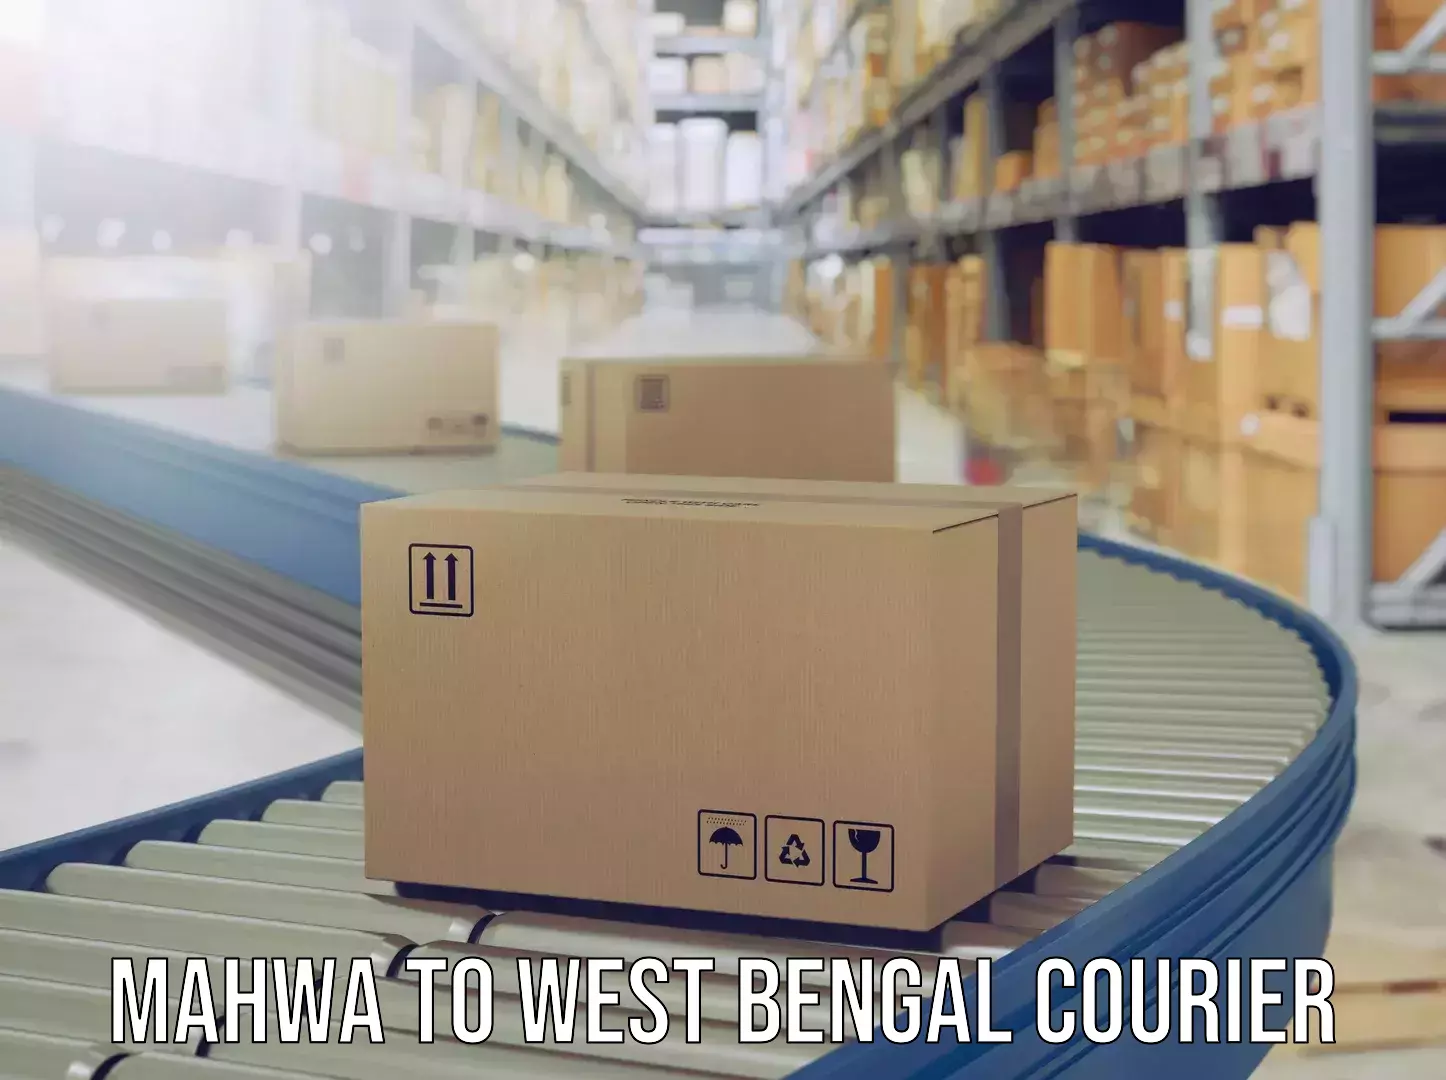 Luggage shipment specialists Mahwa to West Bengal